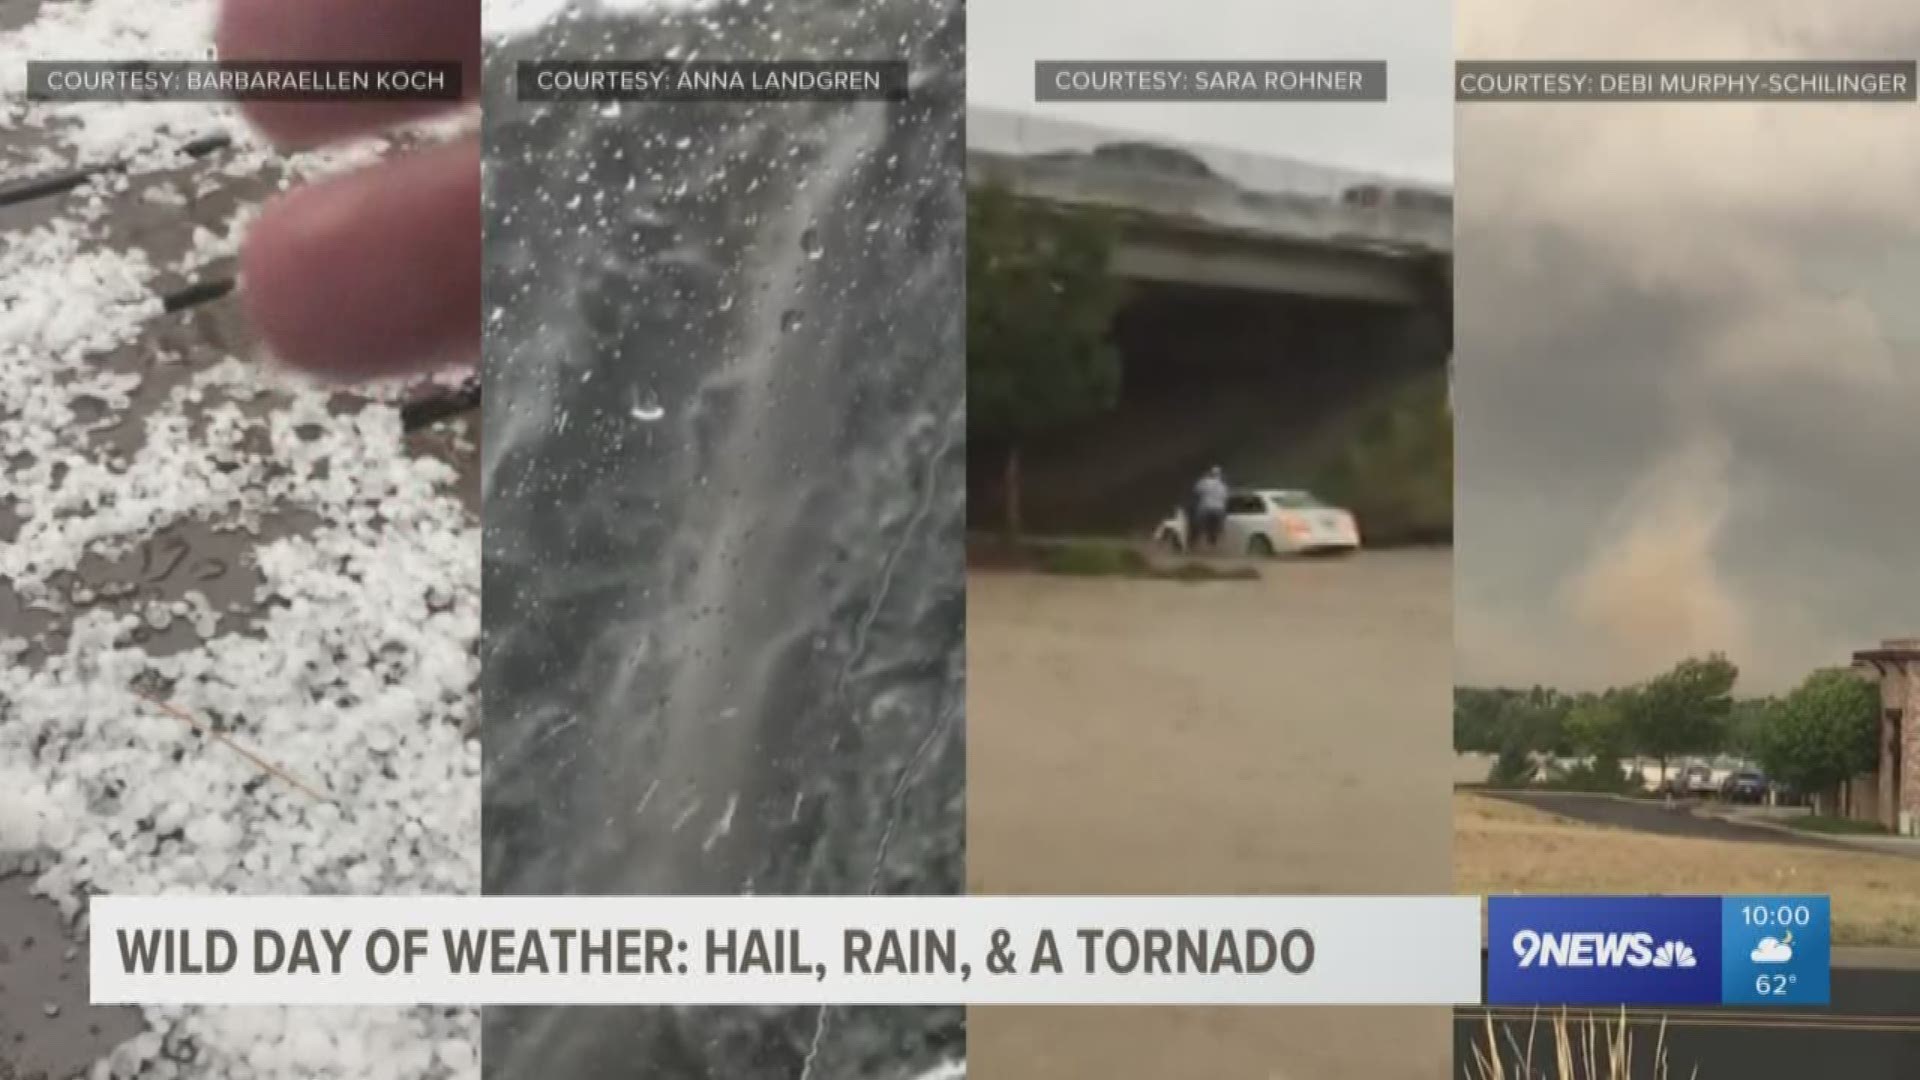 Severe storms moved through the Denver metro area Friday afternoon, causing roads to flood, hail to pile up and a brief tornado to form near Highlands Ranch.